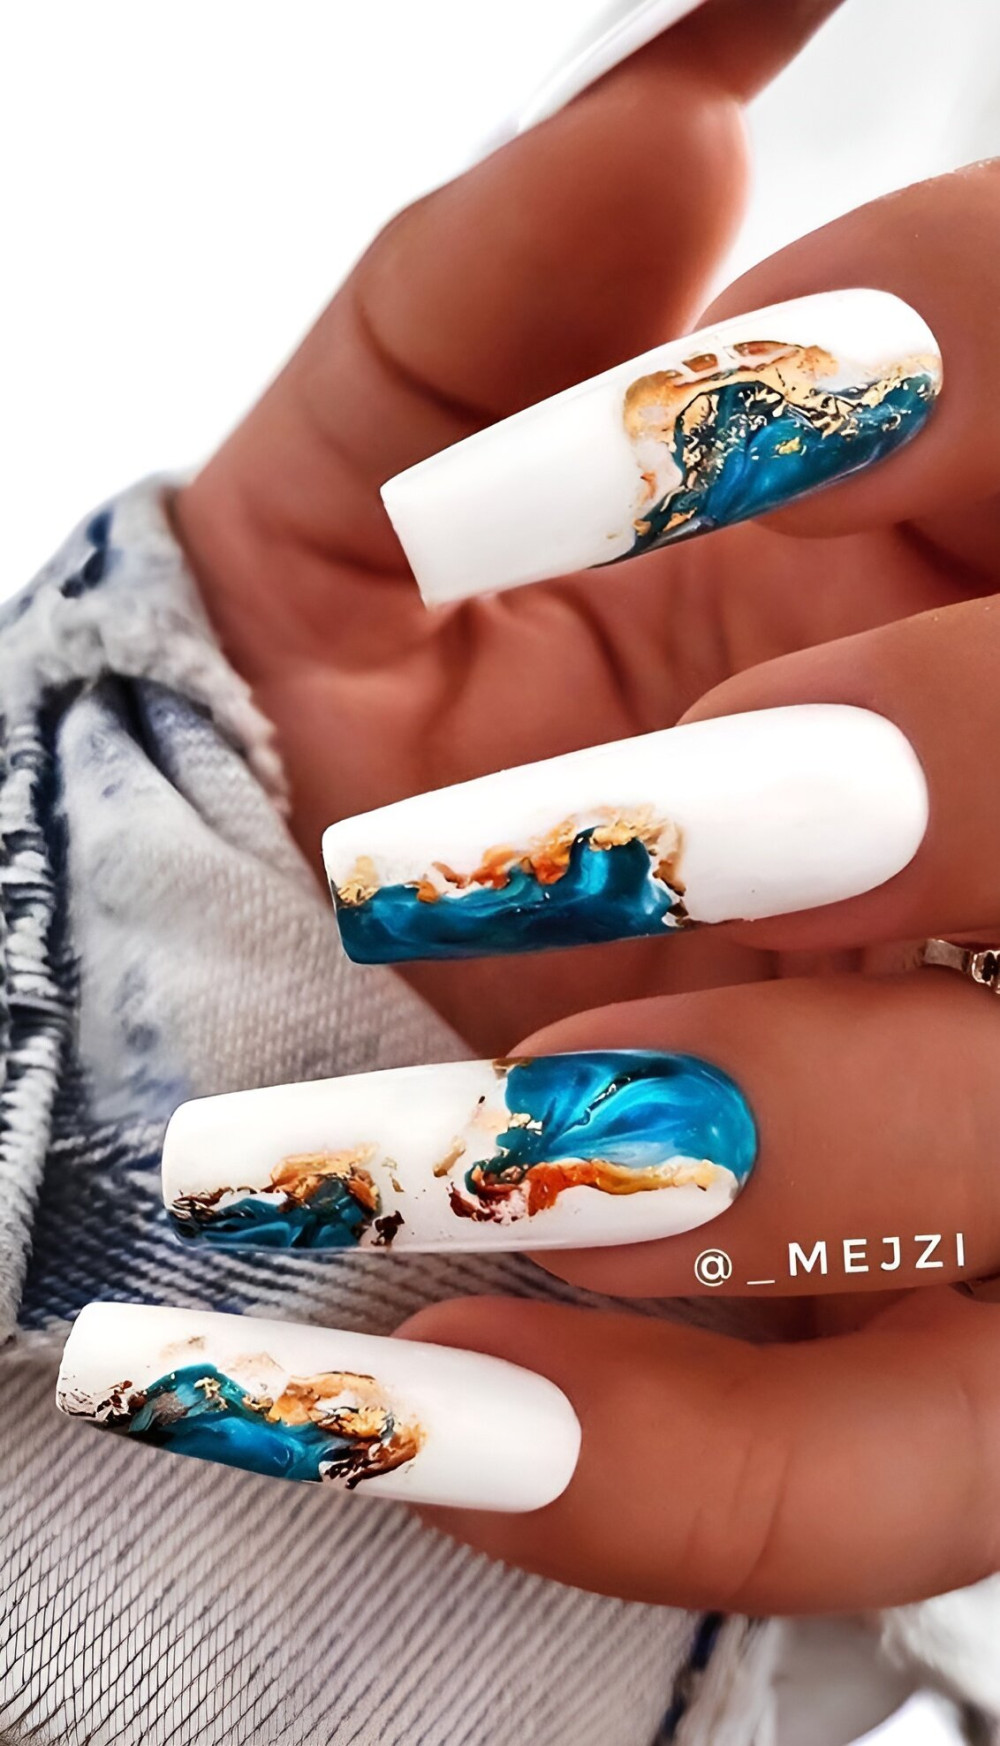 40+ Vacation Nail Art Ideas Perfect For A Beach Summer Holiday - 319